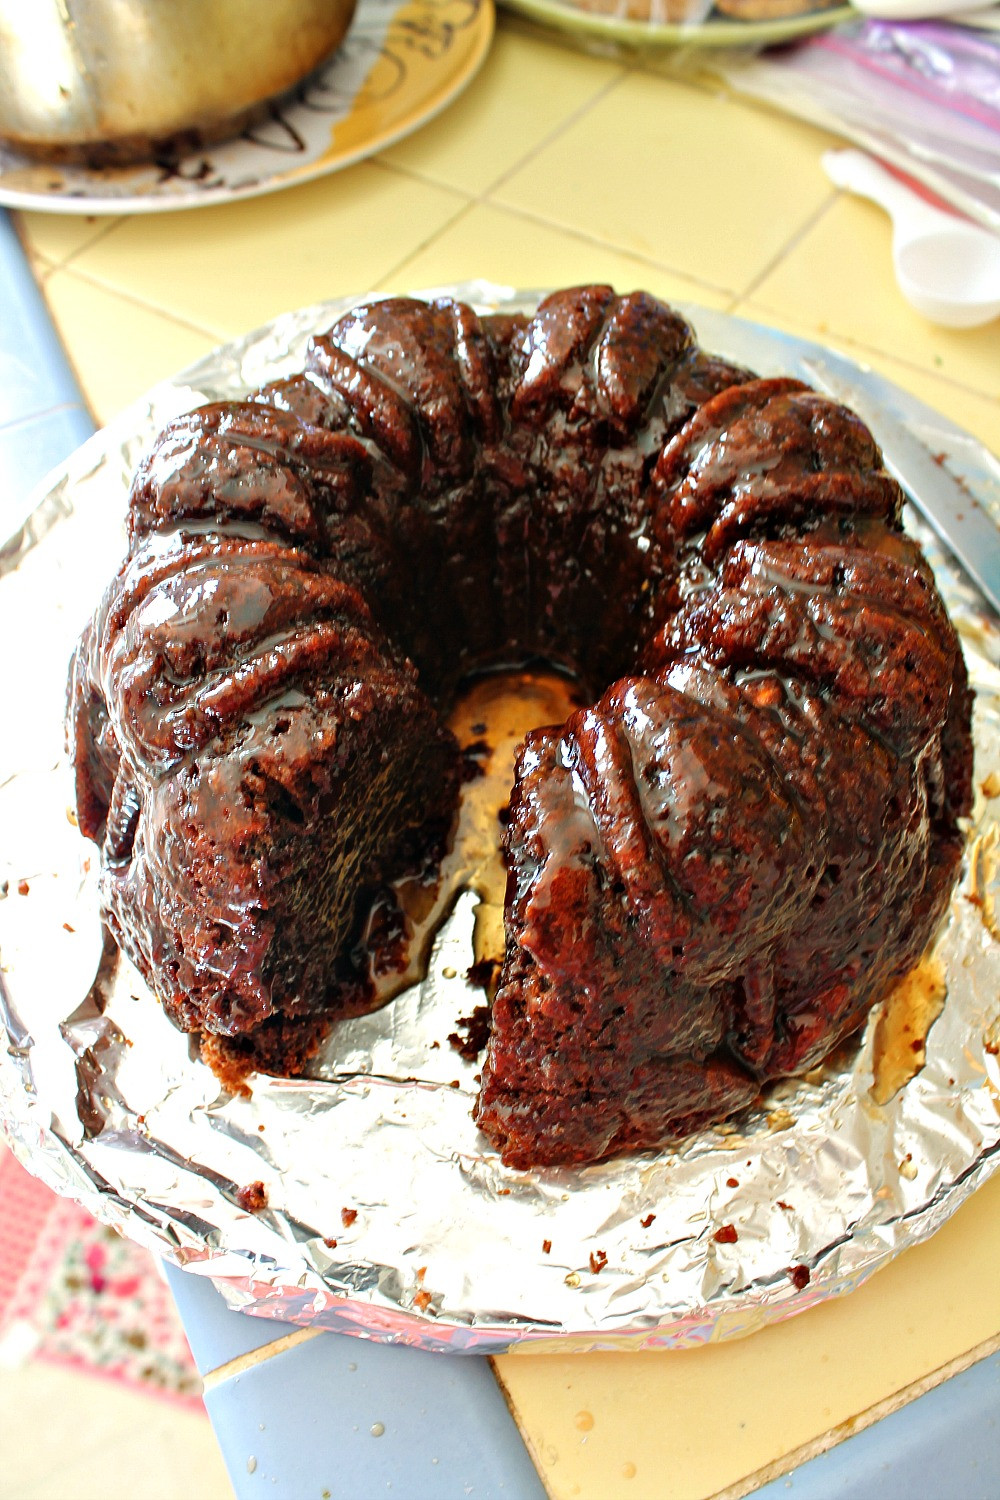 Rum Bundt Cake
 Chocolate Rum Bundt Cake with Chocolate Syrup churned by